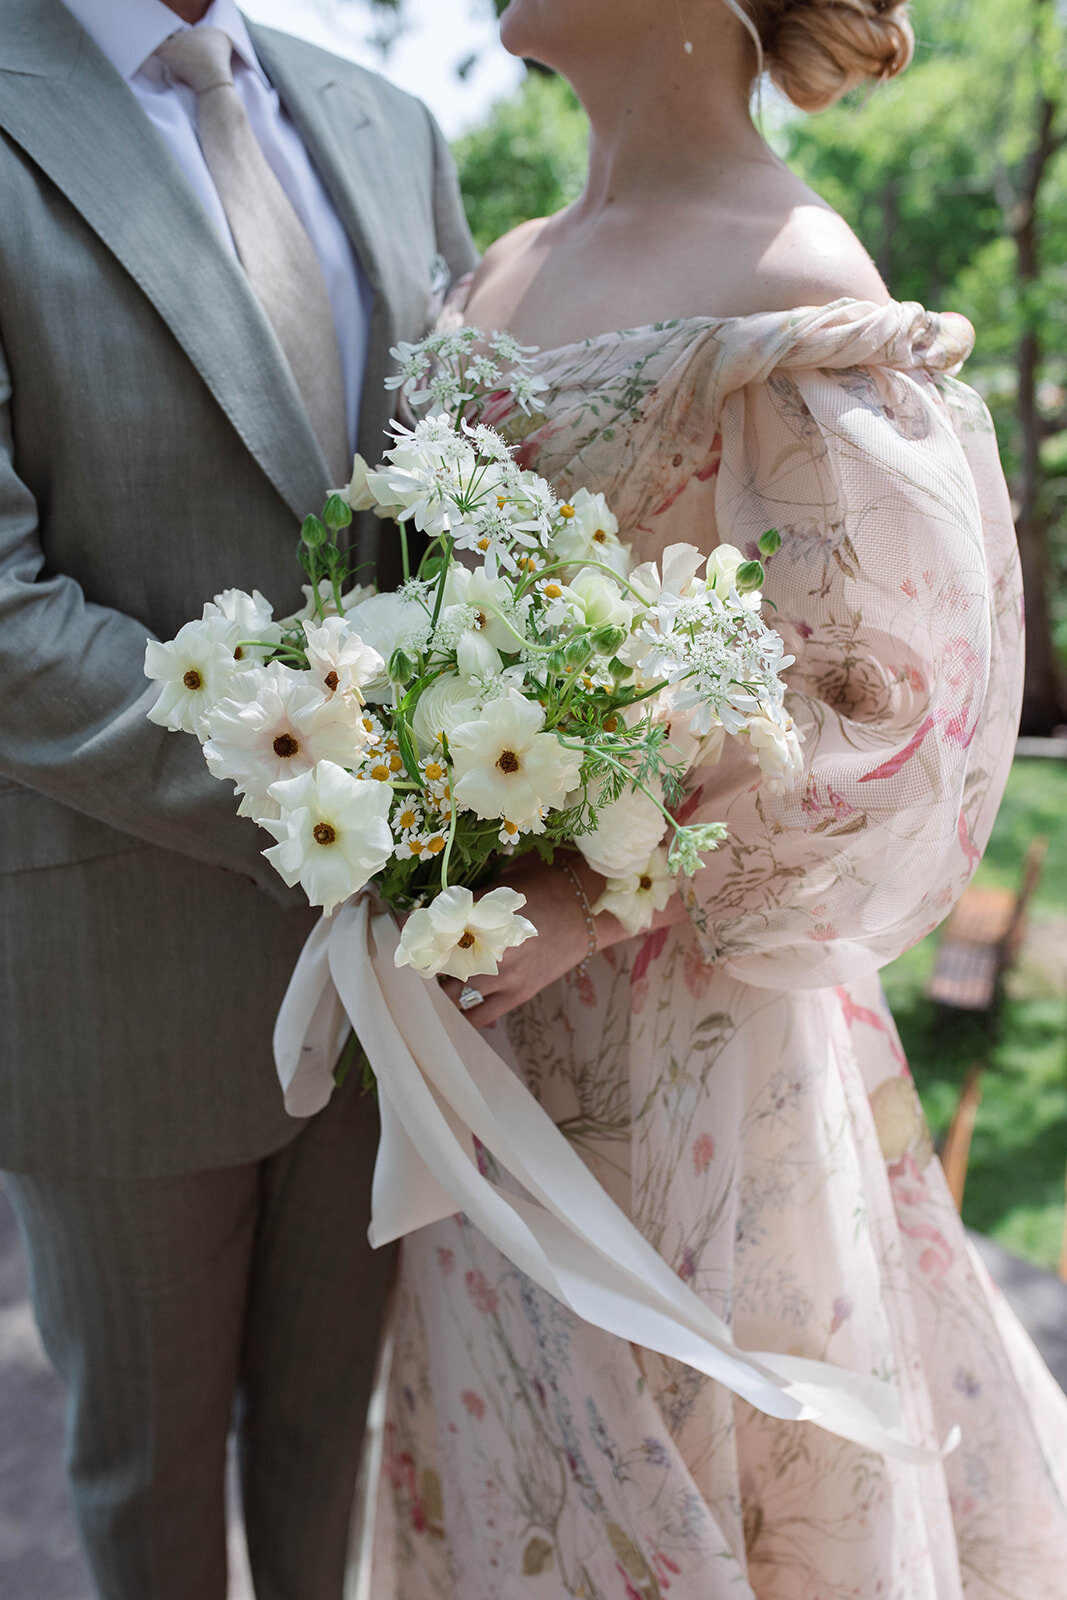 Close-up photo of bride’s floral off-the-shoulder gown. Bride holding garden style bridal bouquet with white and blush butterfly ranunculus and daisies tied blush ribbon.